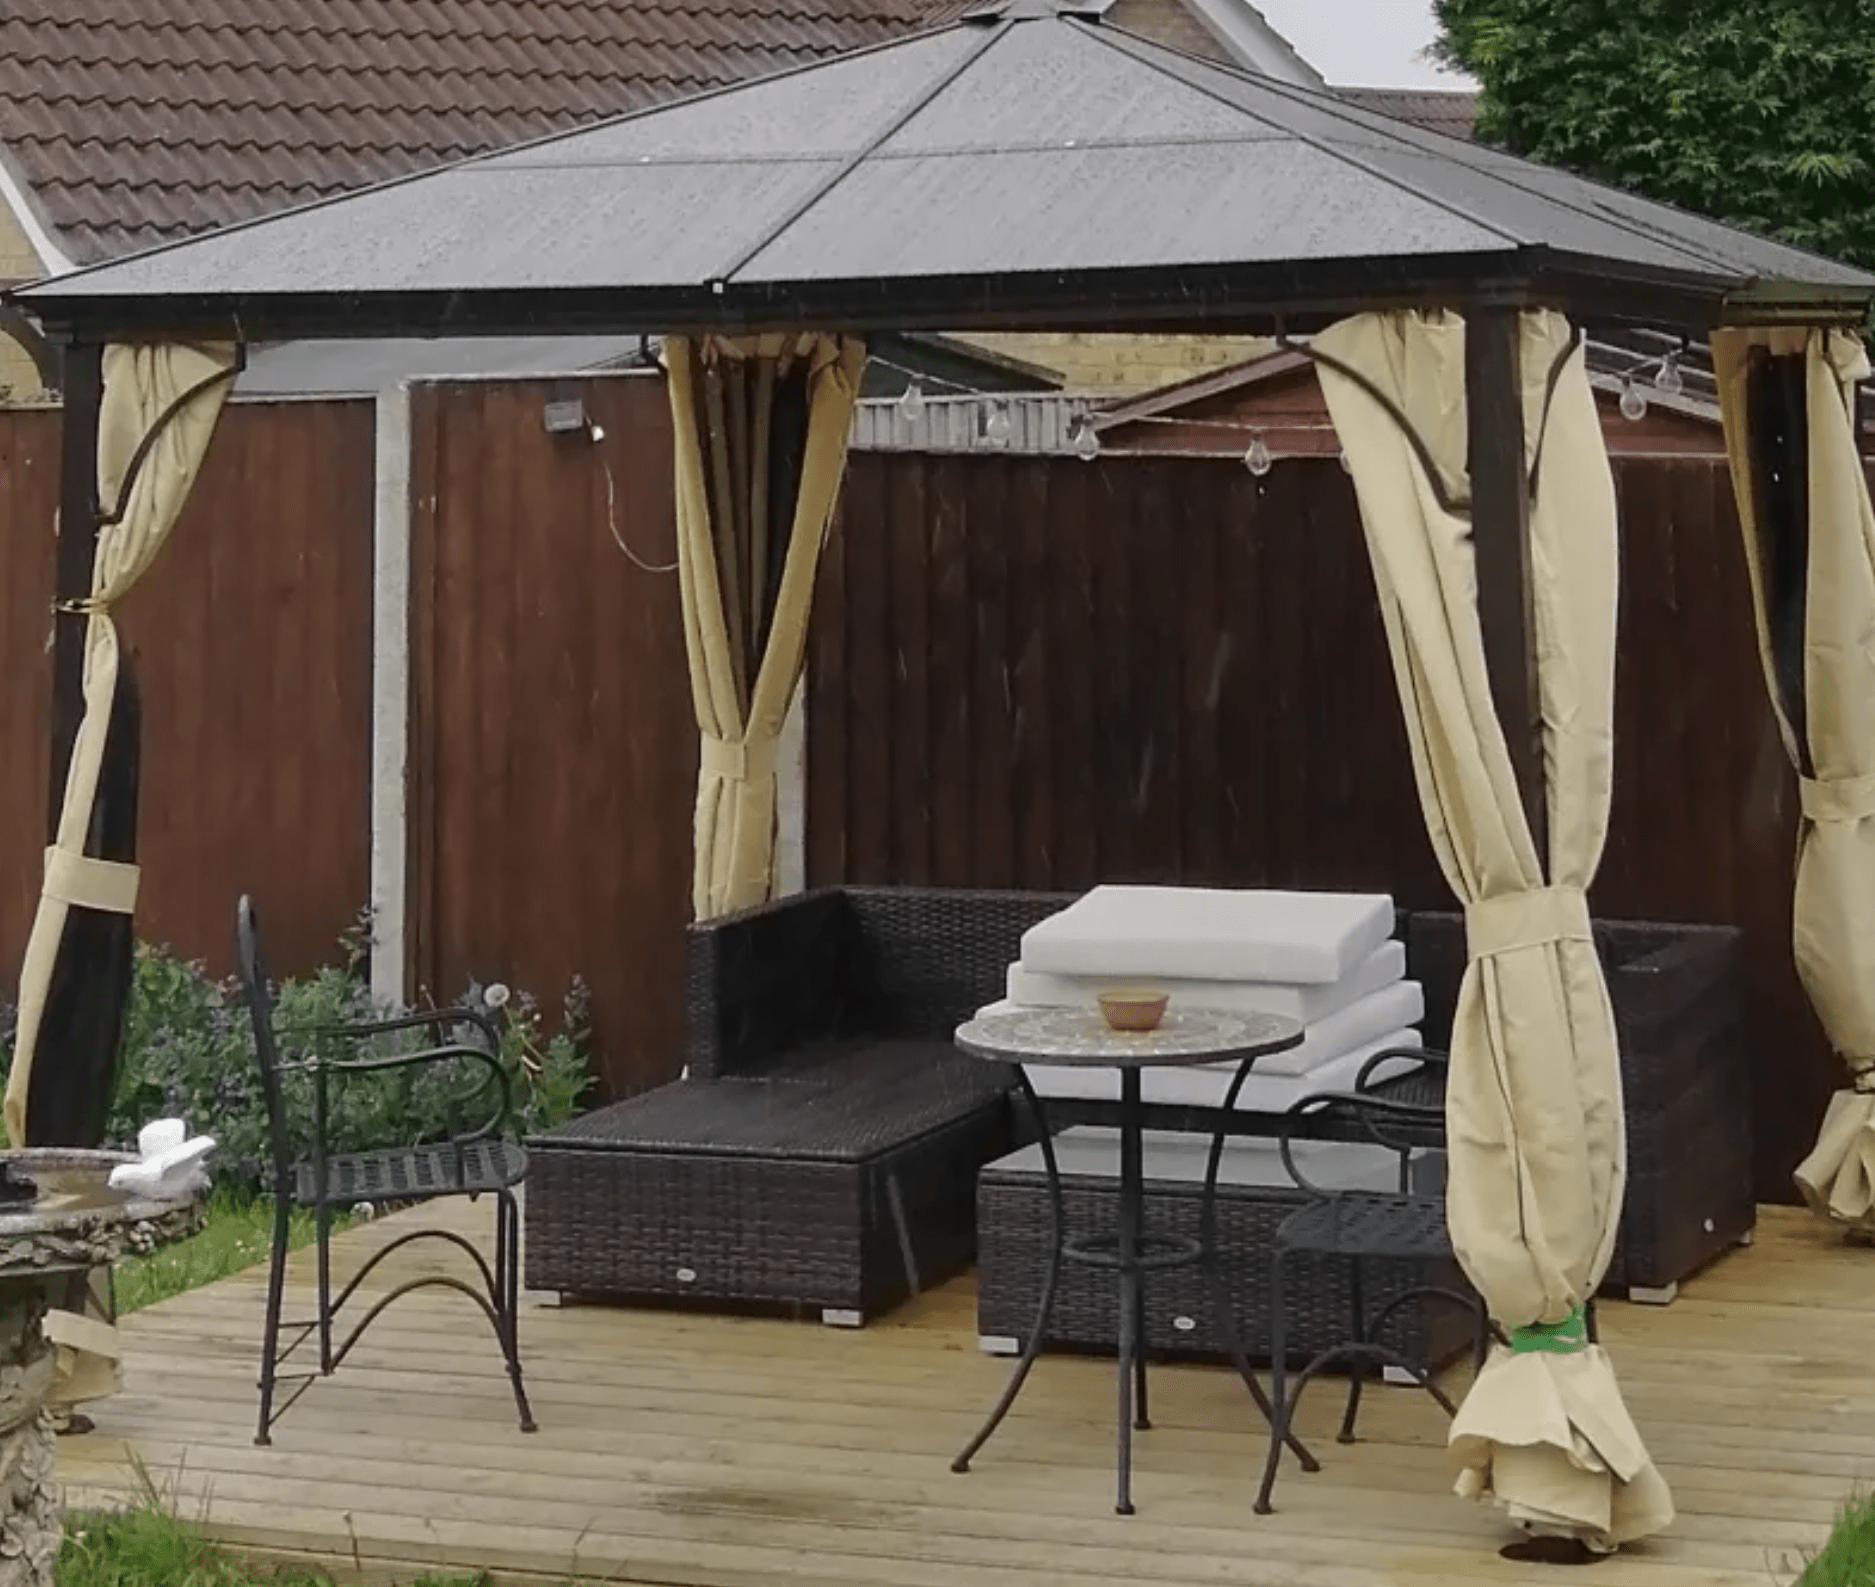 TriShade Enclave: 3x3 m Gazebo with Mosquito Net in Brown, Black, and Beige - Trade Warehouse